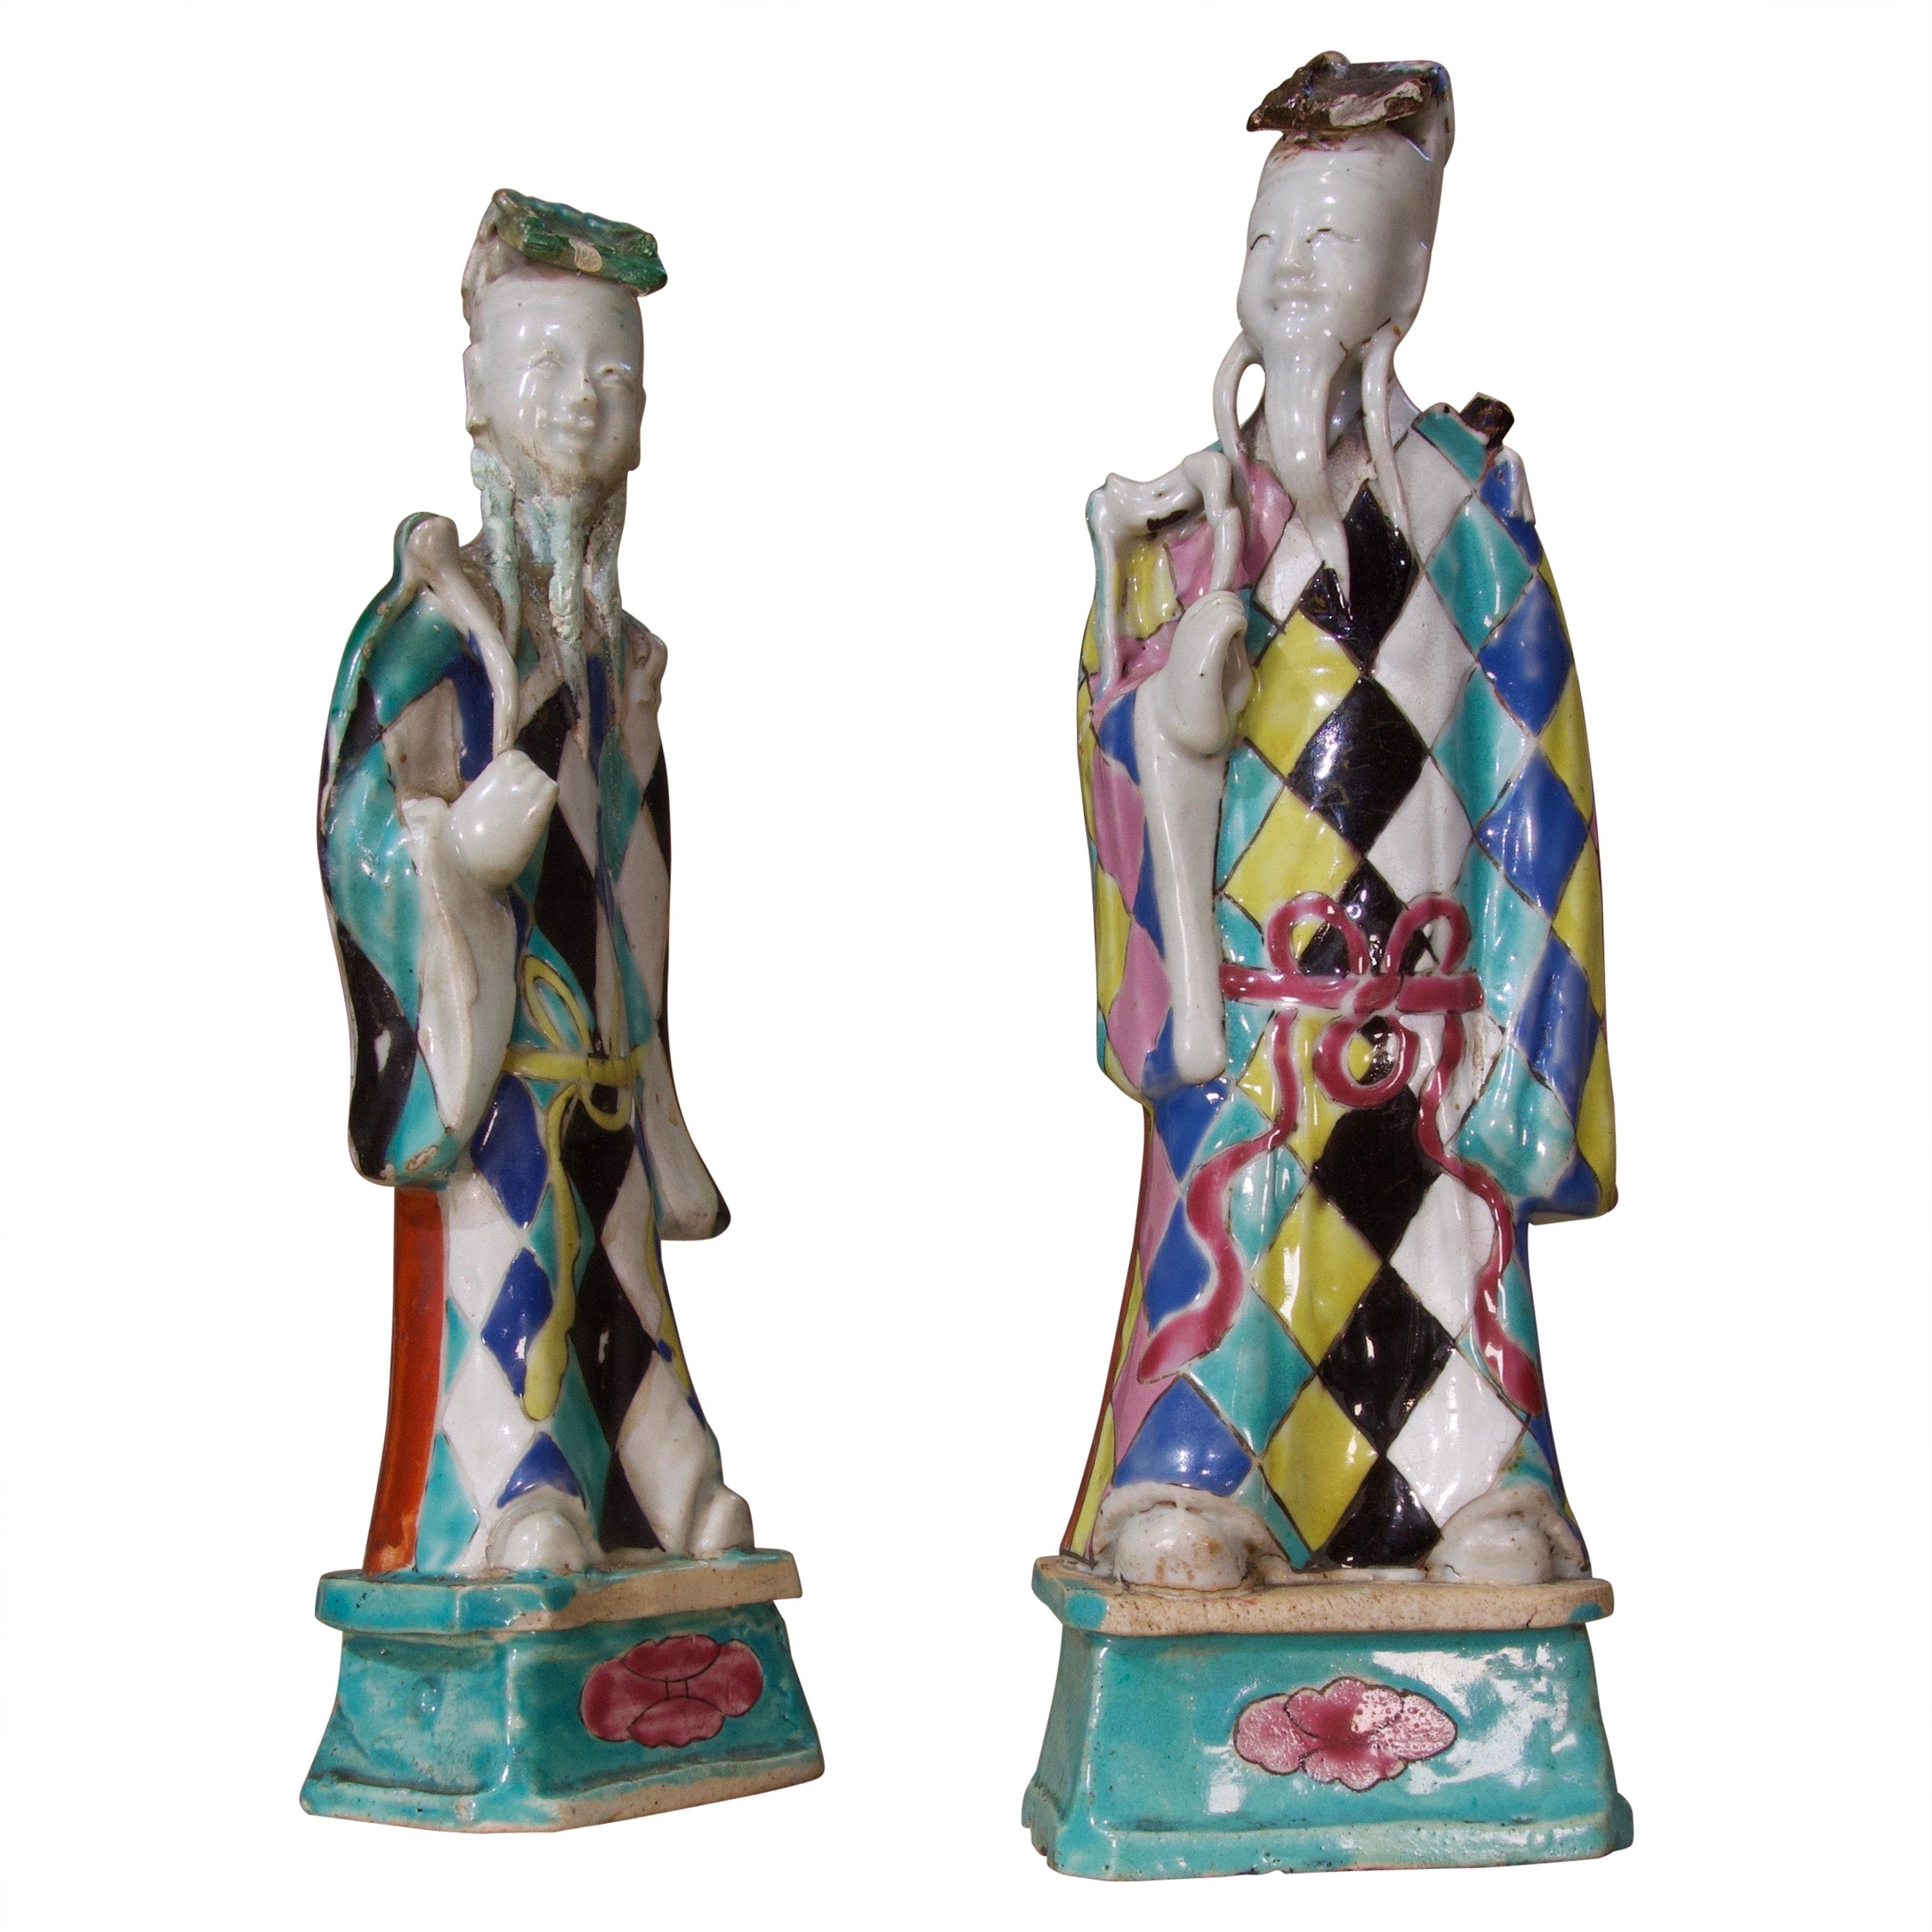 Charming Near Pair of 18th Century Chinese Export Immortals, Harlequin